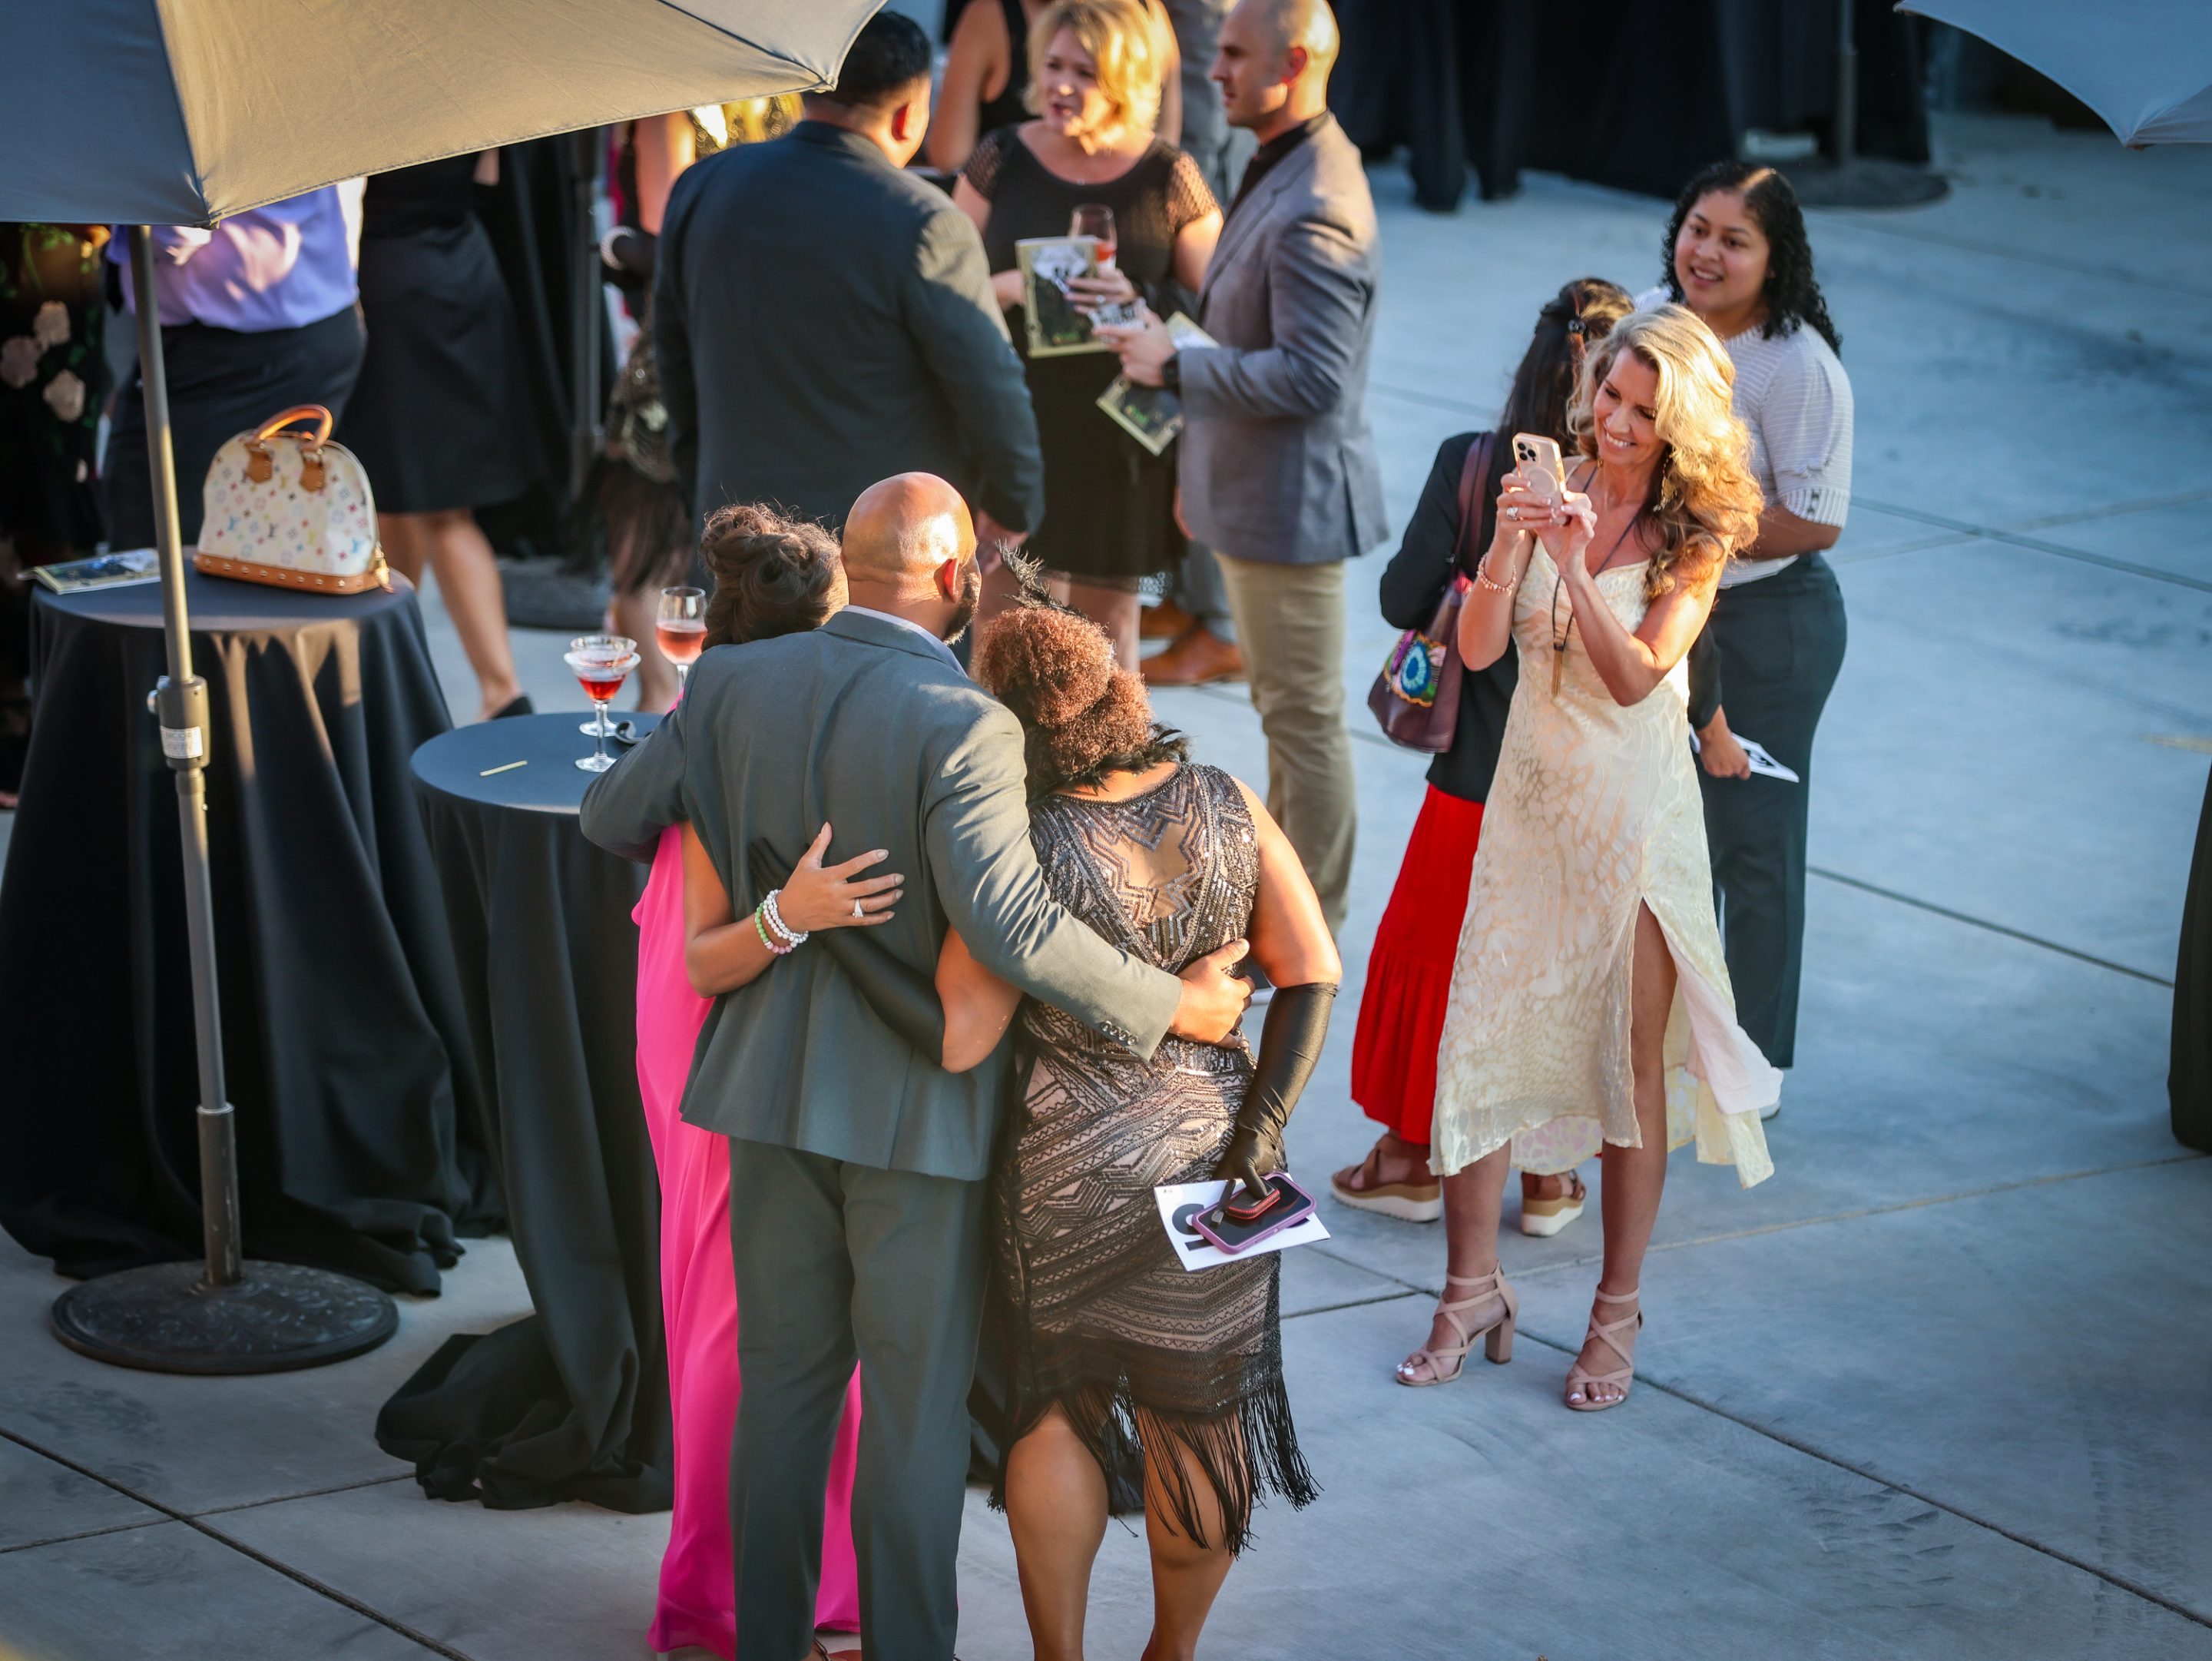 A group of people hugging at The LIME Foundation, a Sonoma County non-profit organization.